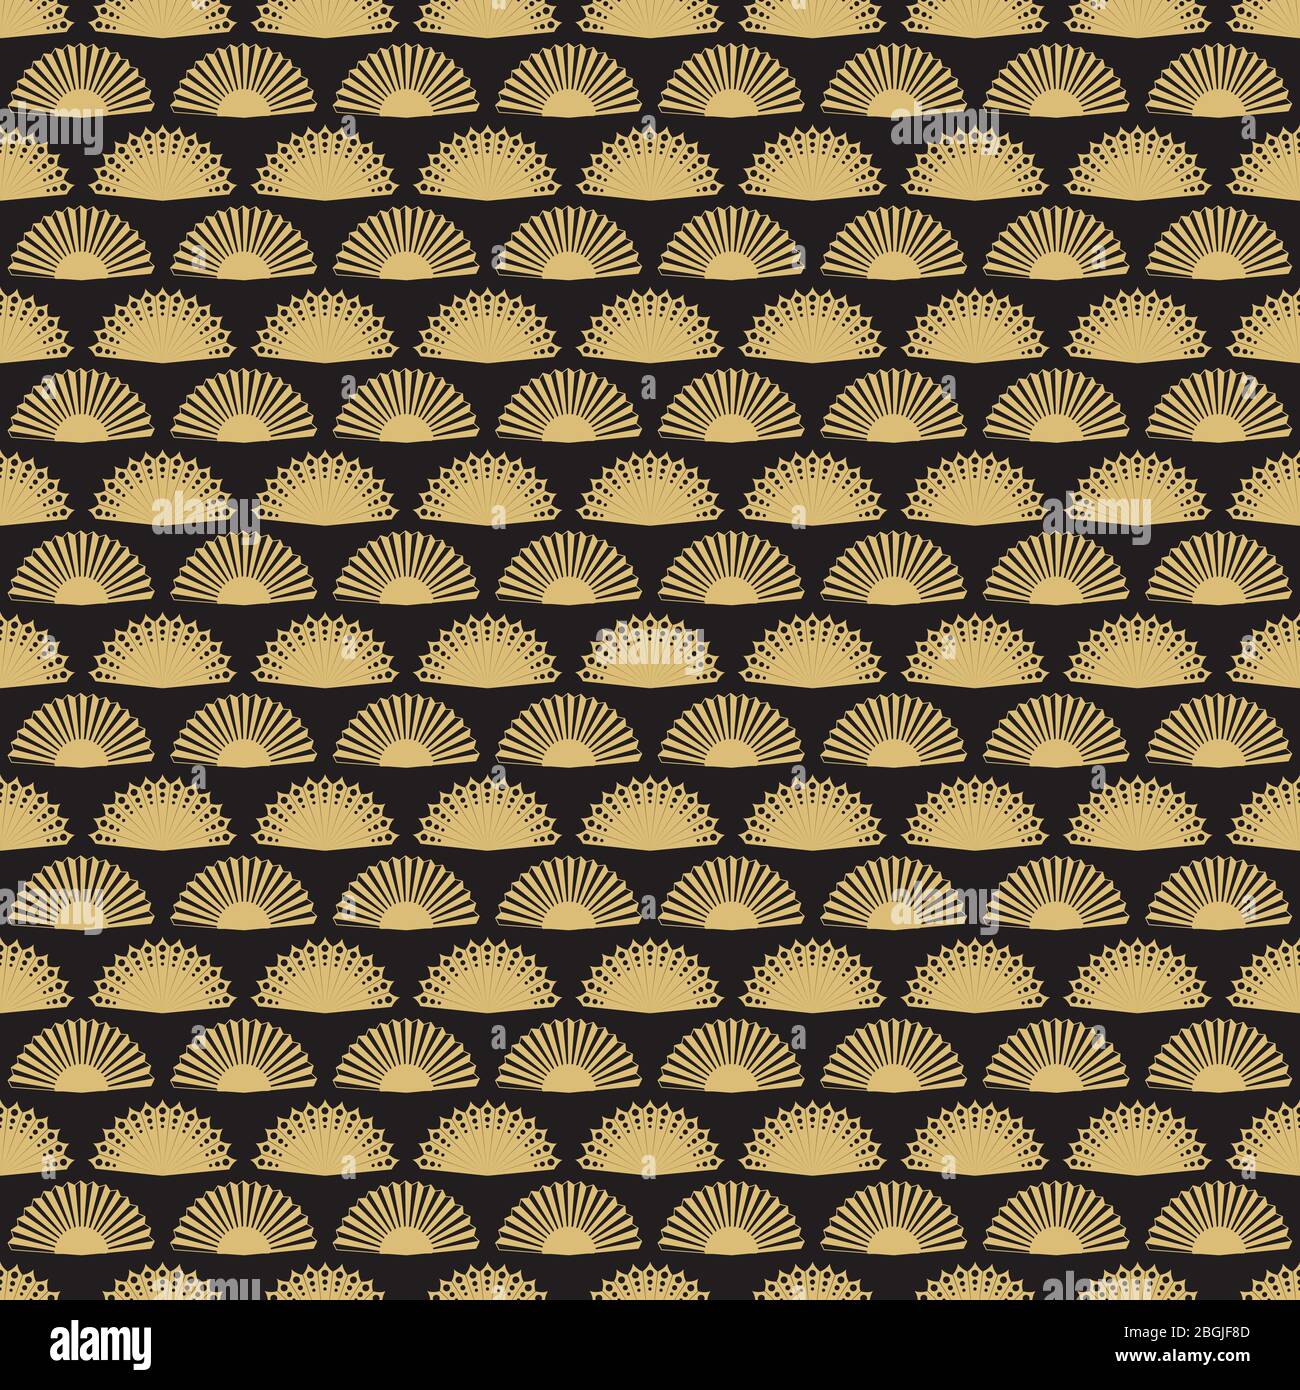 Gold hand fan background seamless pattern design. Abstract geometric fans texture. Vector illustration Stock Vector